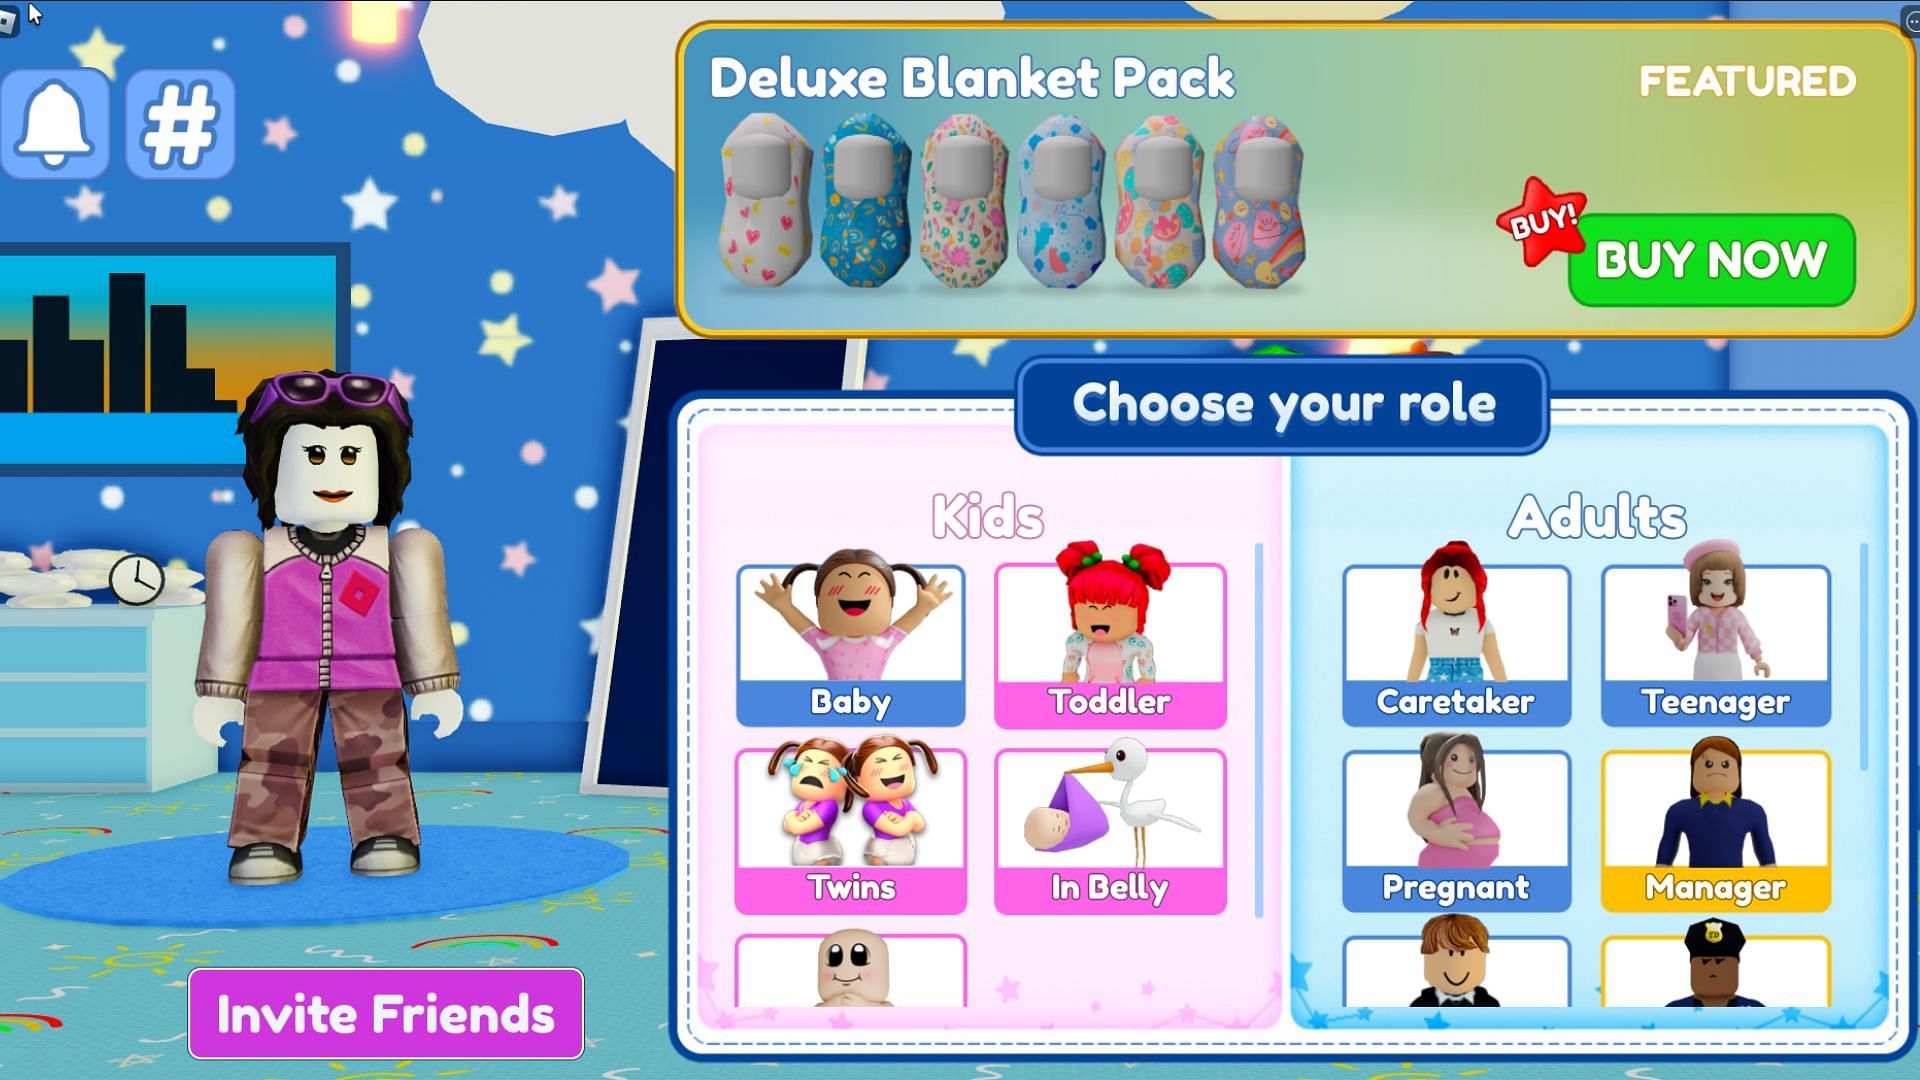 Choose your own role in Twilight Daycare (Image via Roblox)